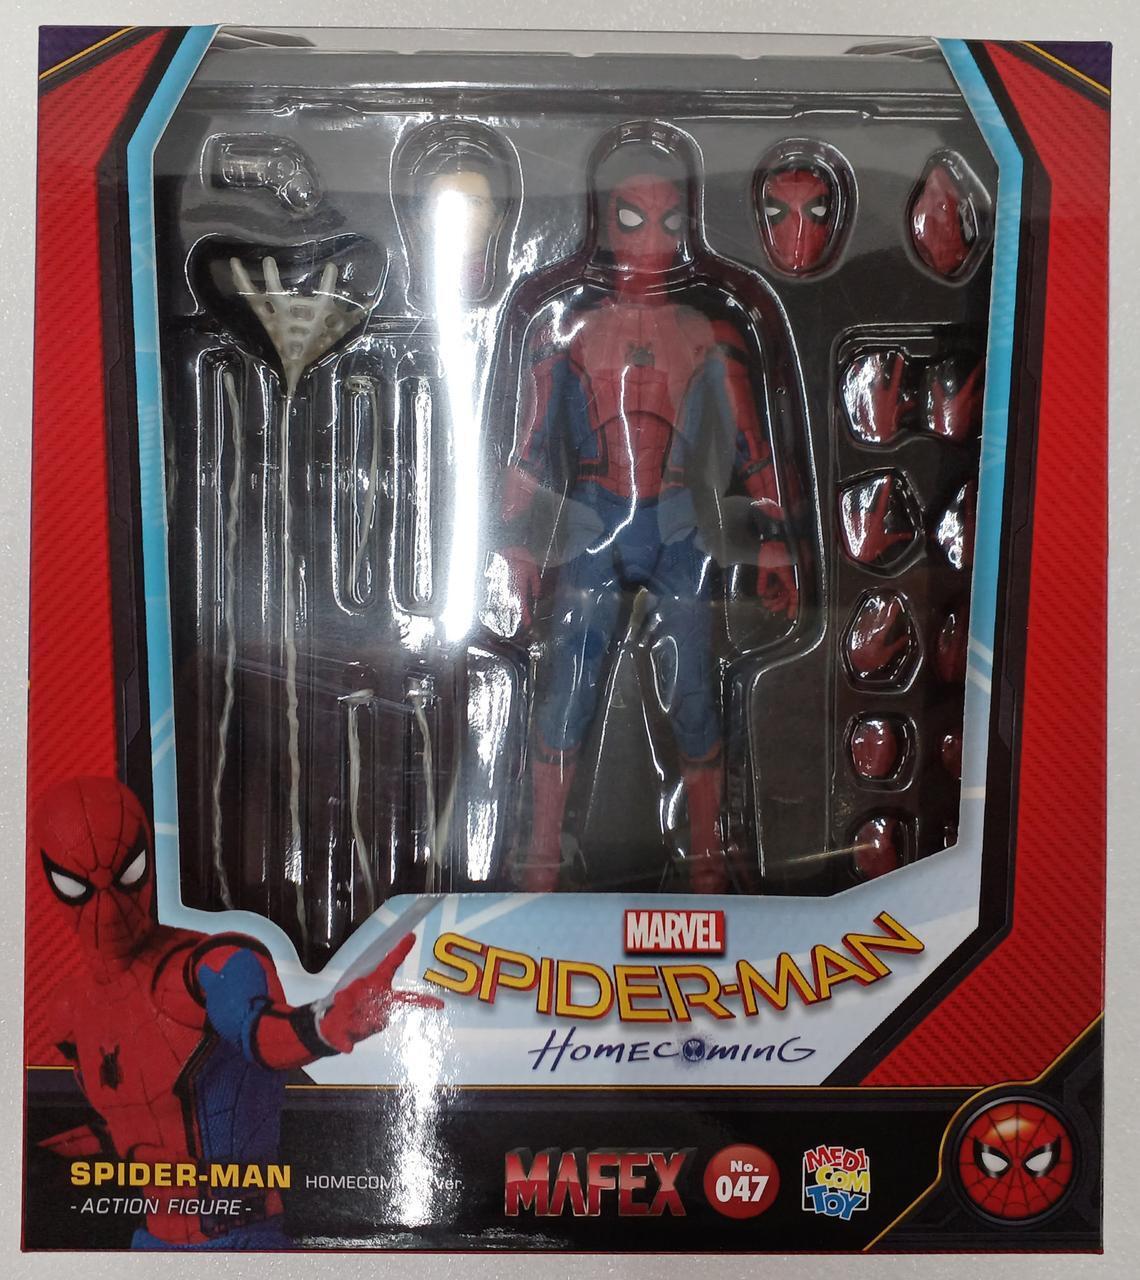 Medicom Toy MAFEX Spider-Man Homecoming Action Figure